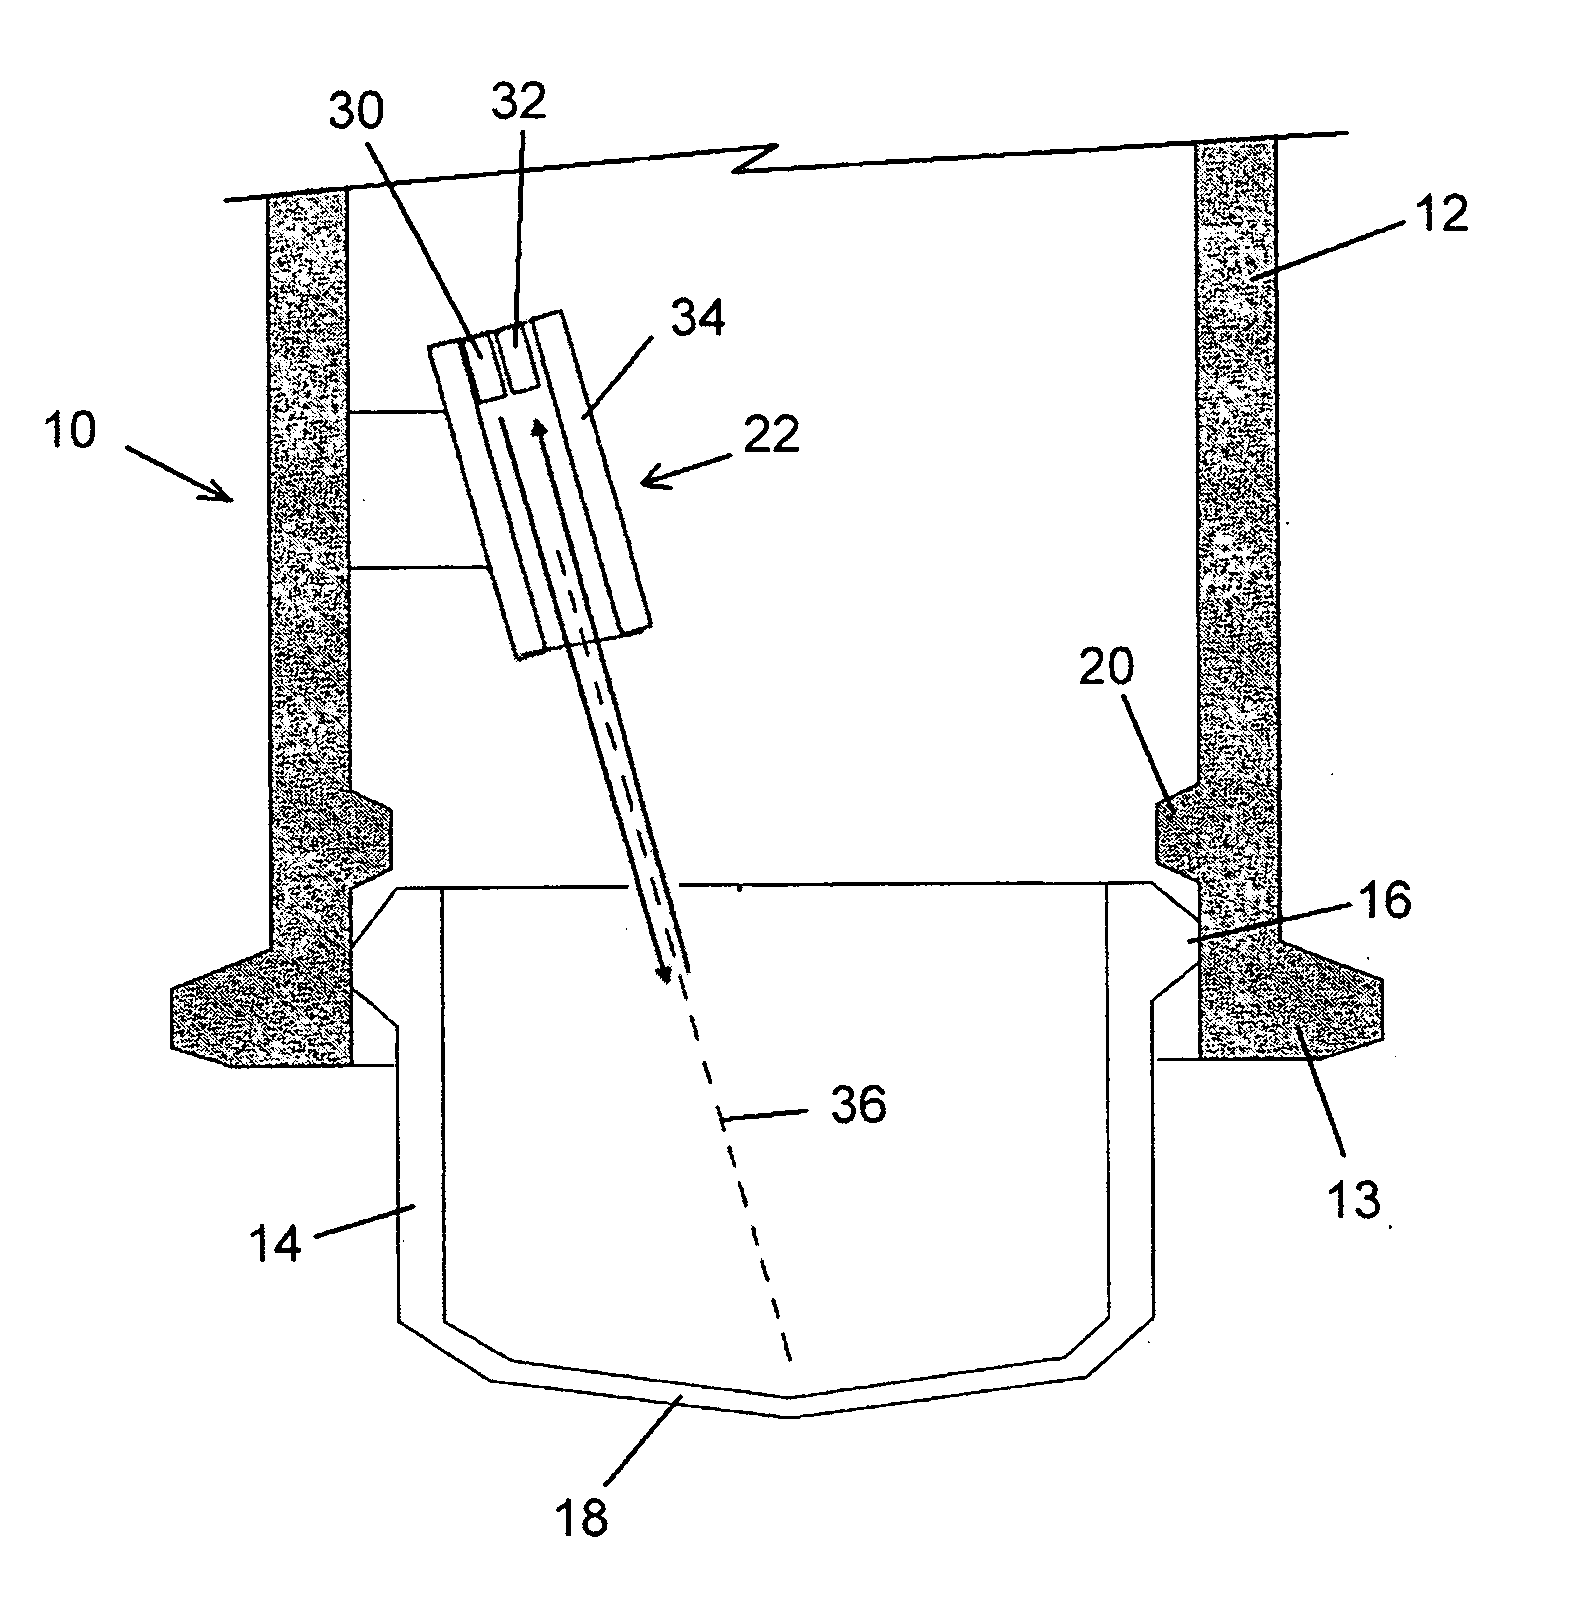 Blanching Device for Use in Evaluating Skin Condition